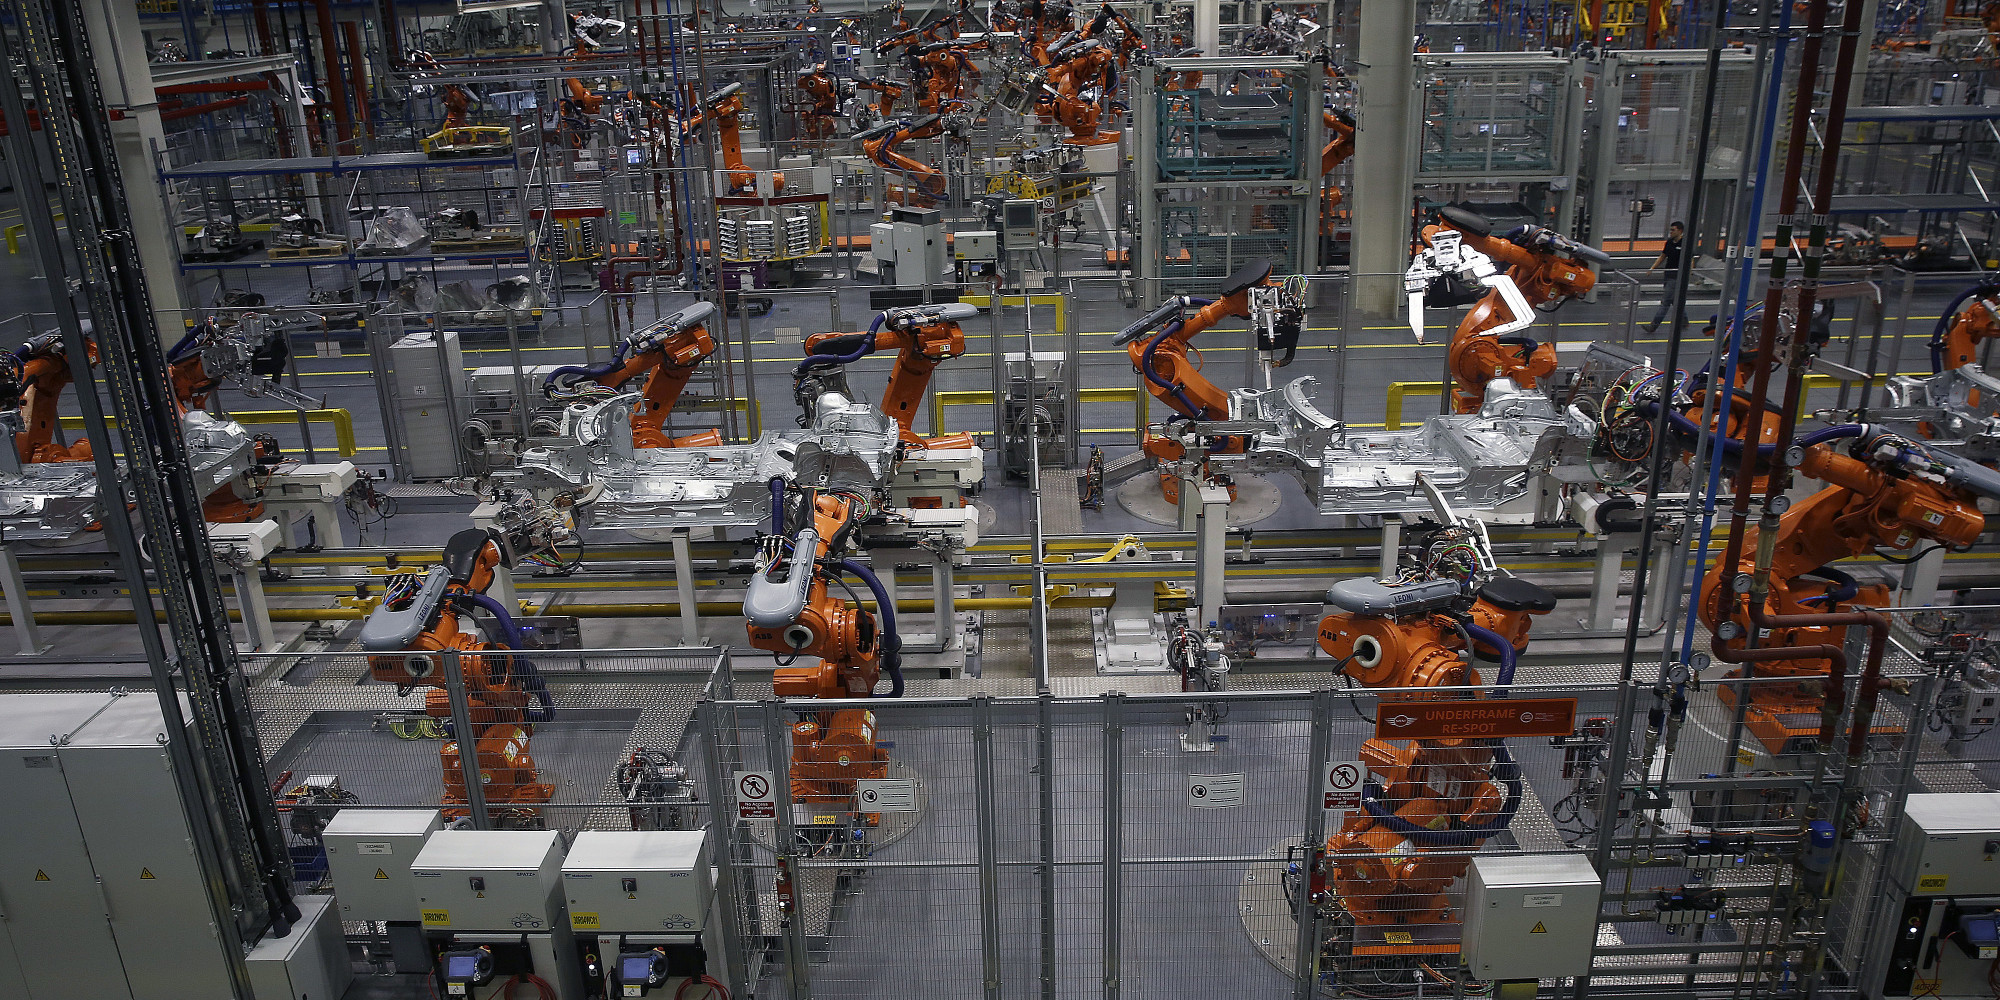 Automation spelling doom for manufacturing hotspots?